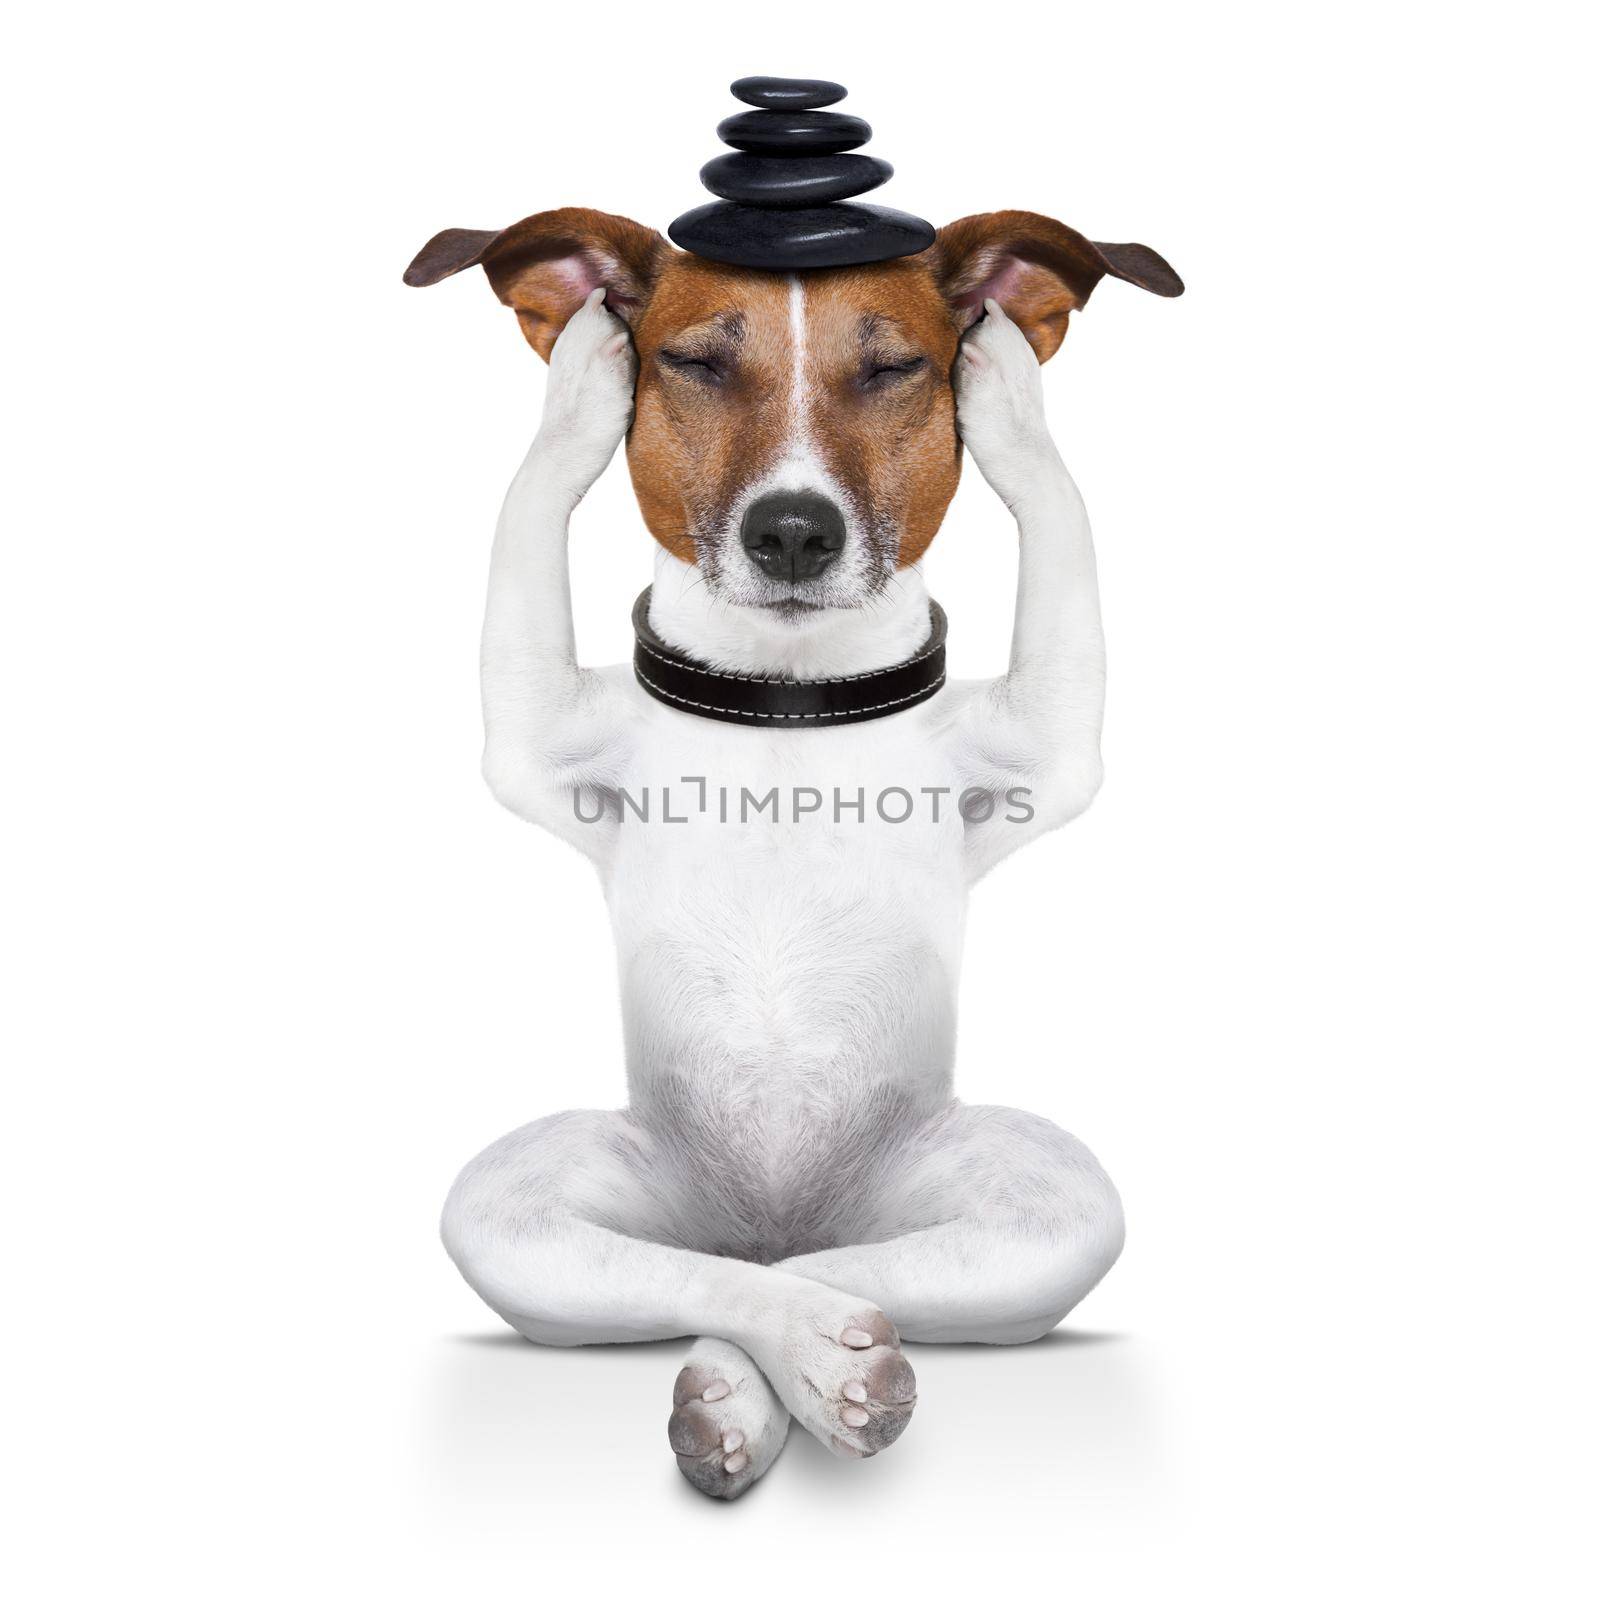 yoga dog sitting relaxed with closed eyes thinking deeply